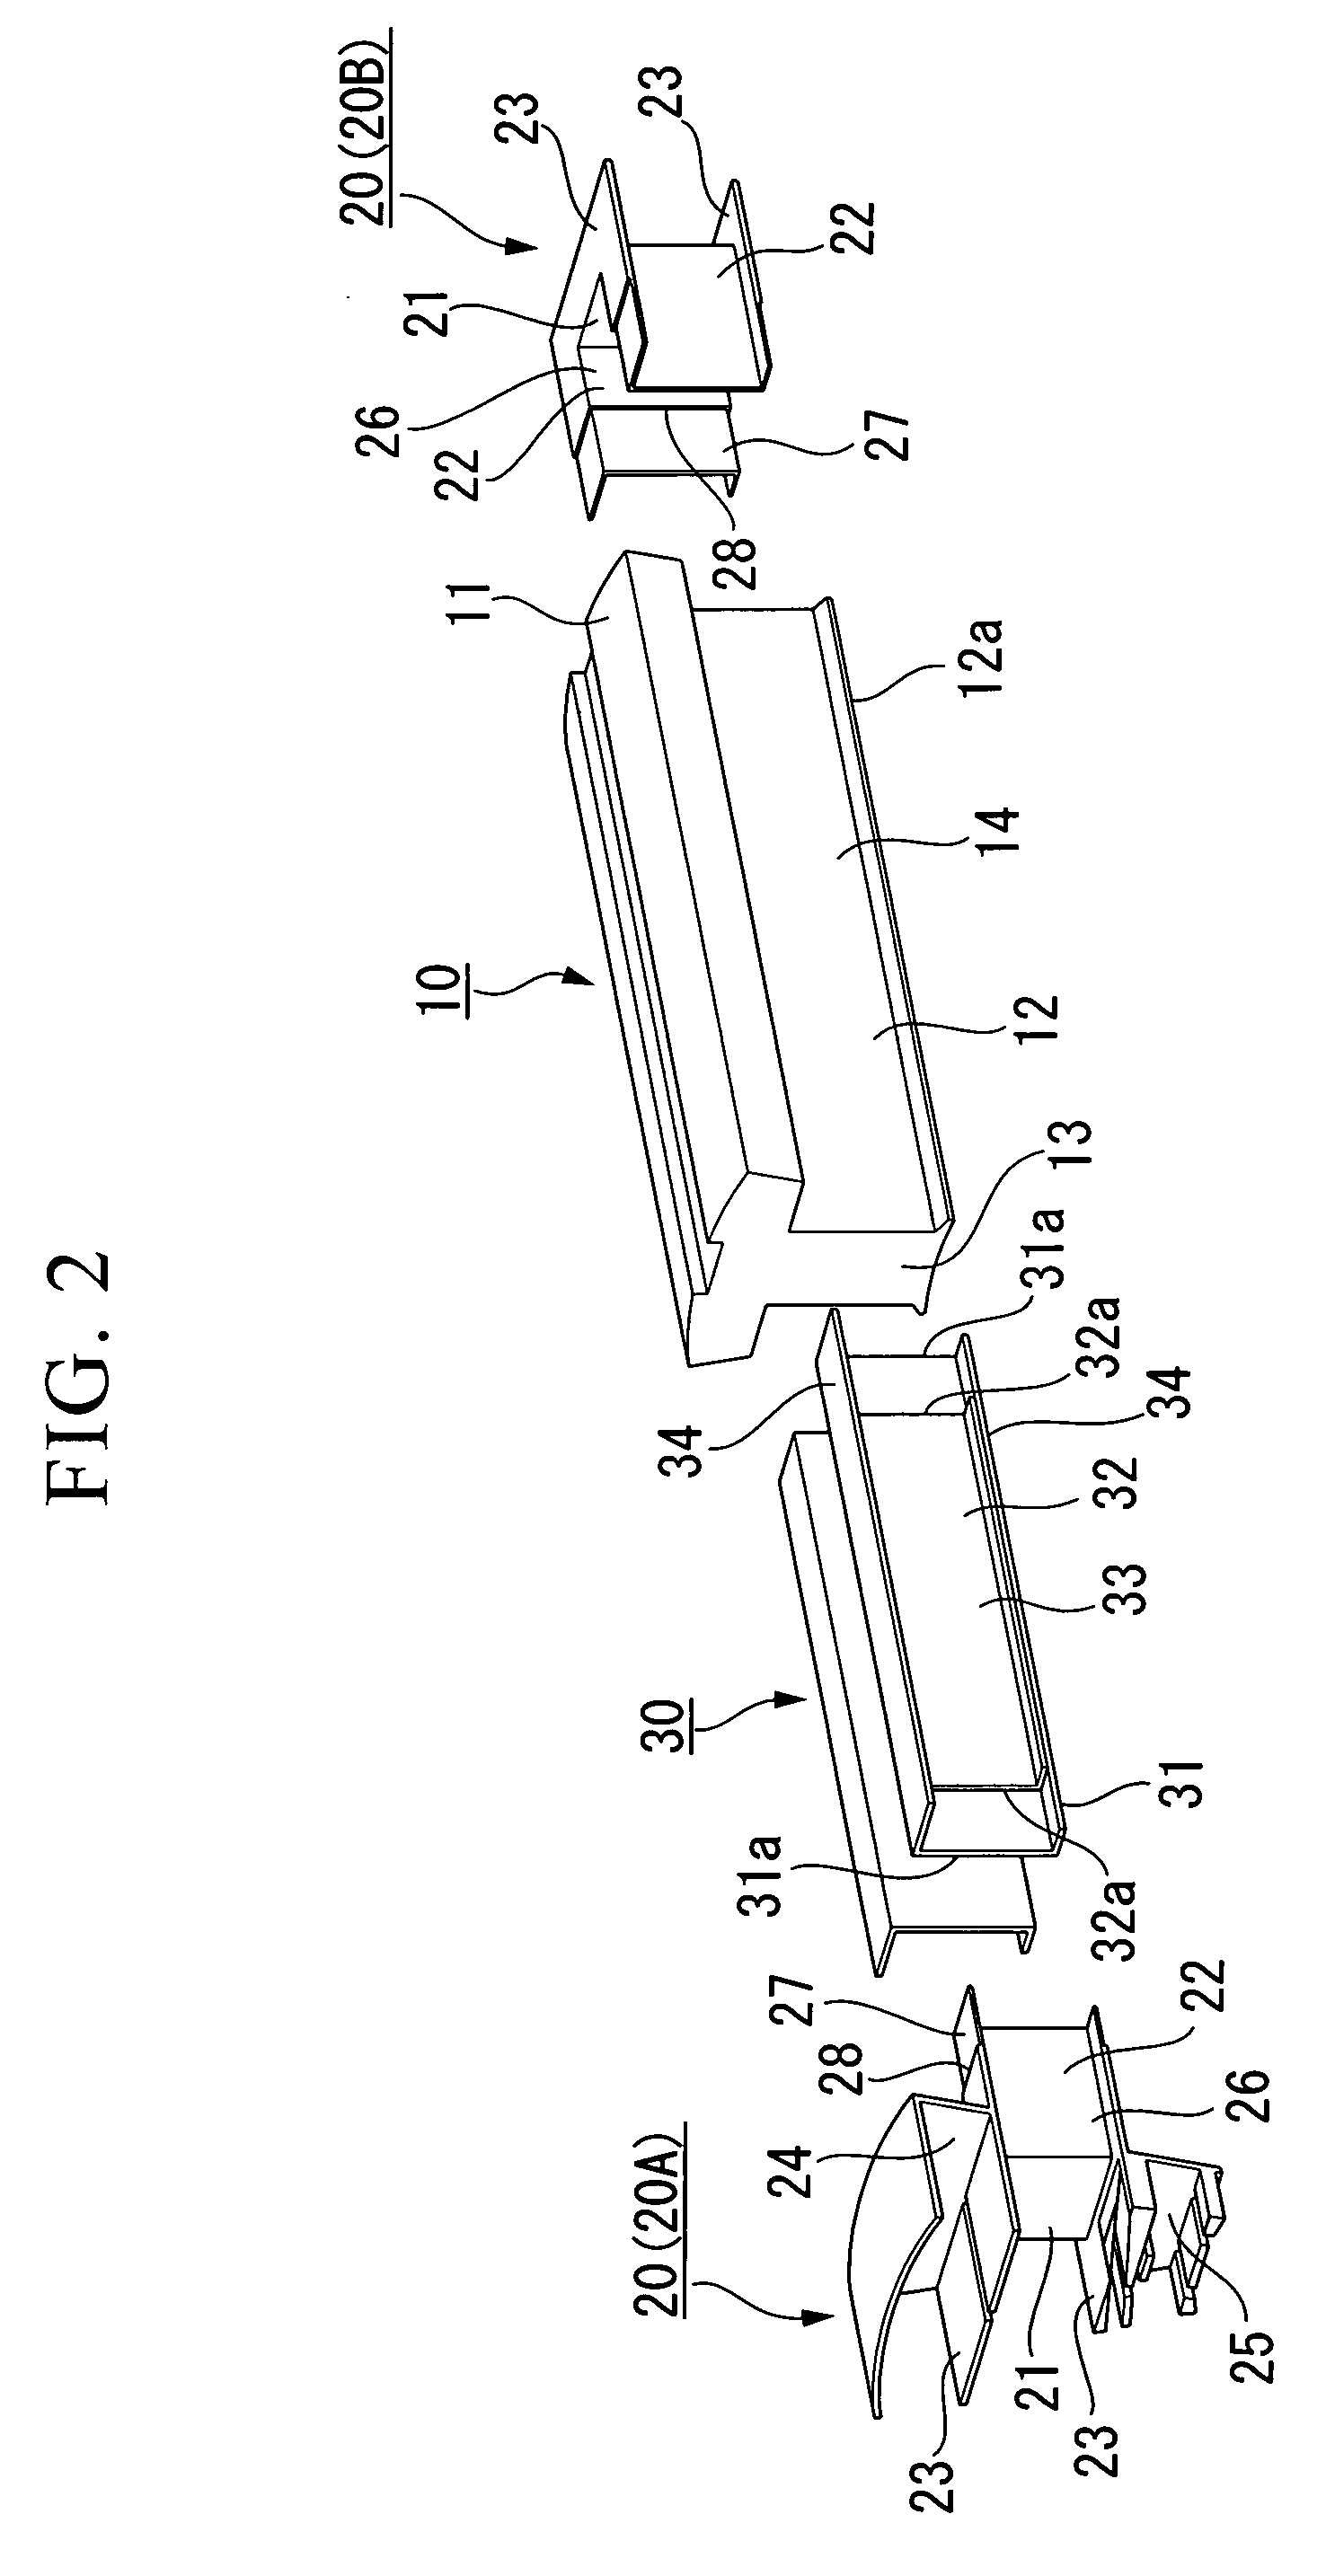 Insulation structure of rotary electrical machinery